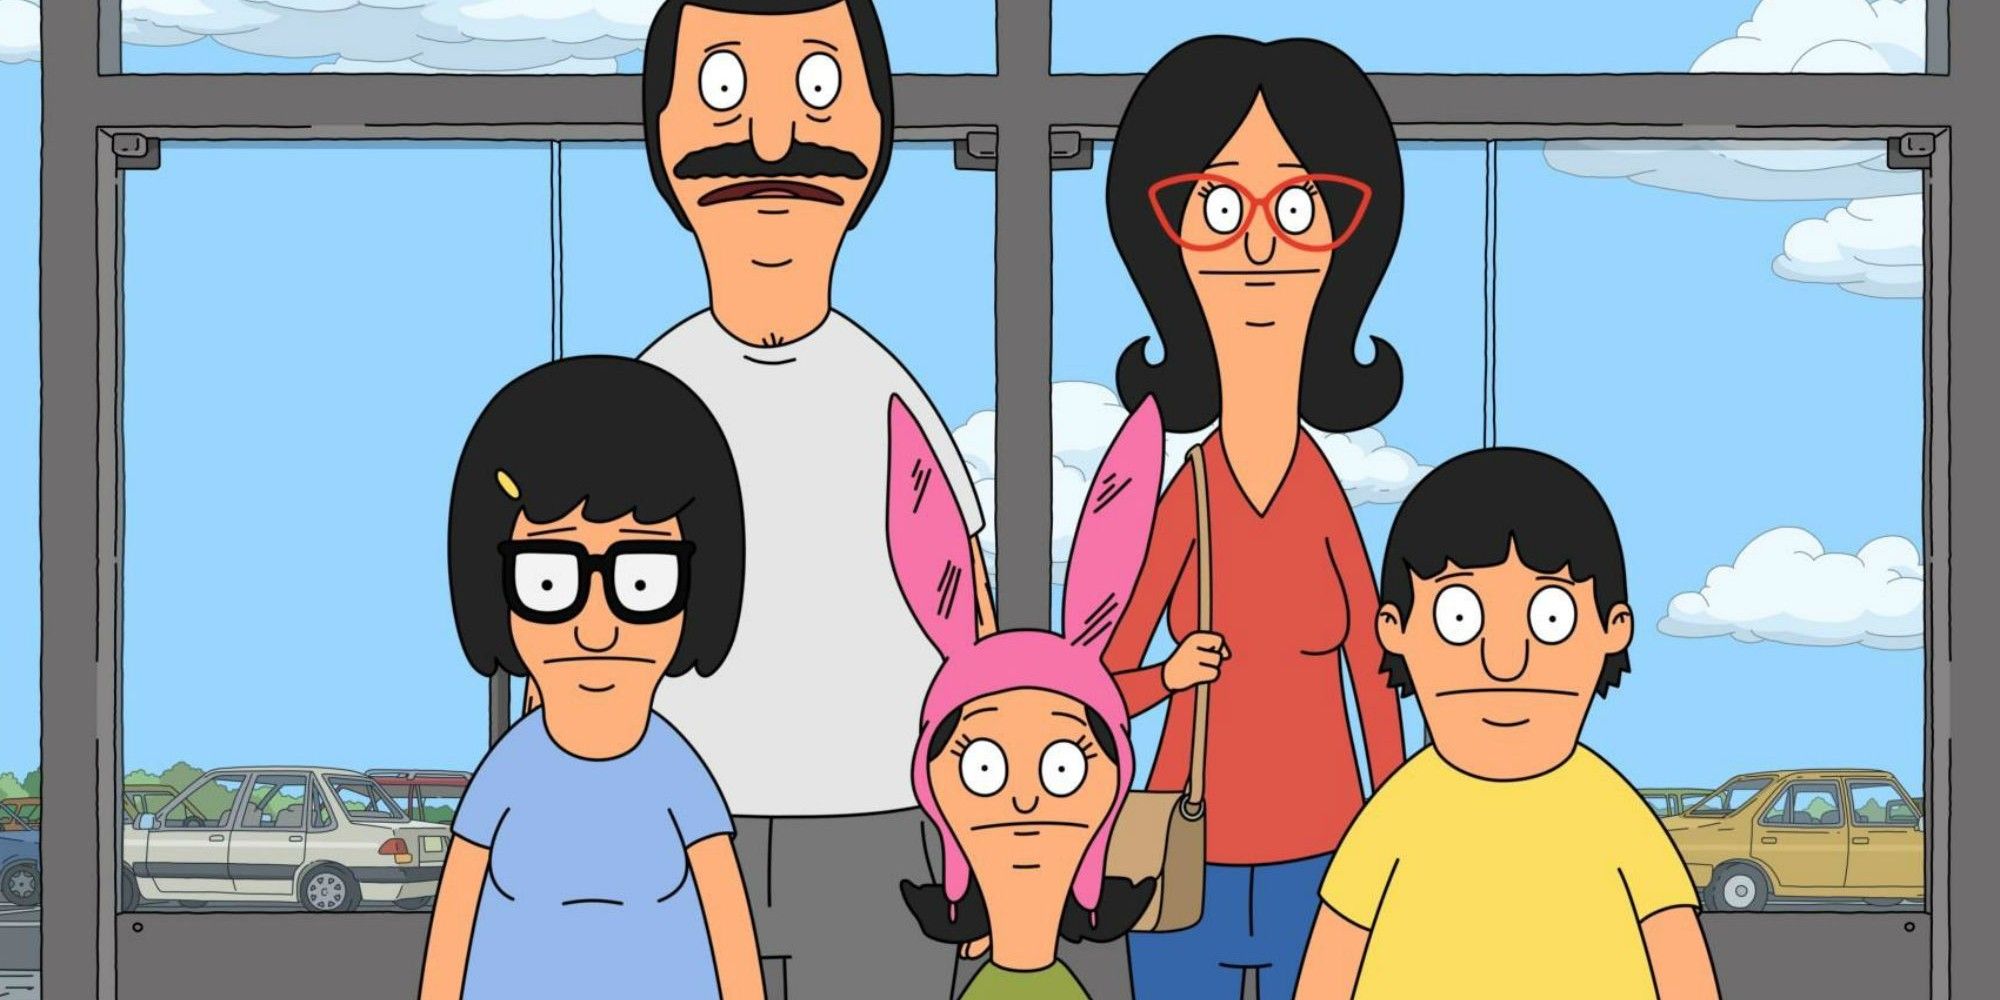 Image from The Bobs Burgers Movie